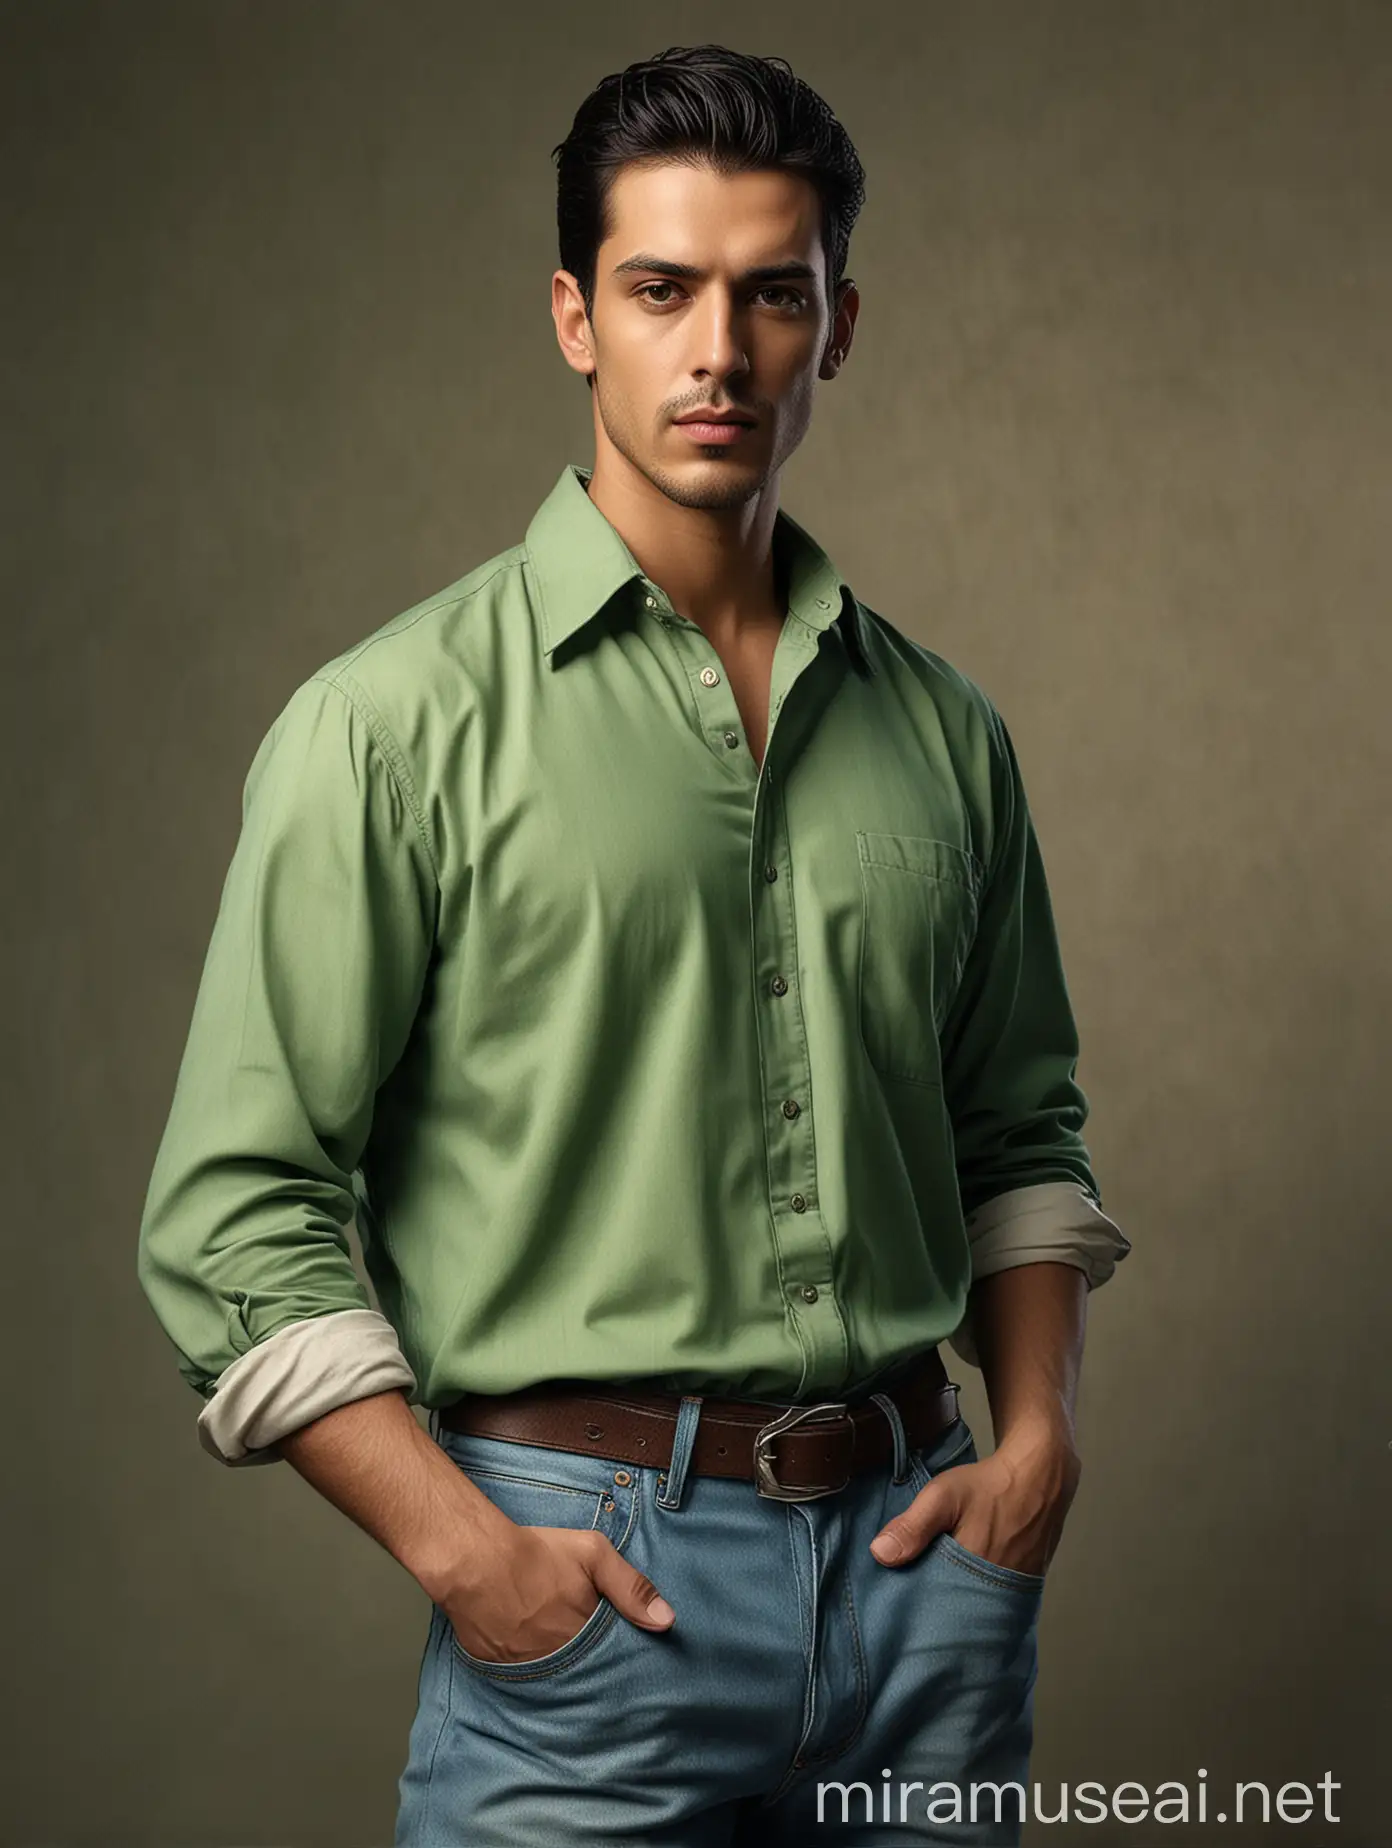 45 years men ,Arrogant and arrogant he stands tall and proud. artistic fashion shoot, high end, photorealistic, dramatic , full figure shot, European mixed Arabian race, dreamy, soft makeup, model fashion pose, high class,  luxurious background, fair skin, high fashion pose. highly detailed, high budget, Wearing casual green shirt (#625e43) and blue jeans